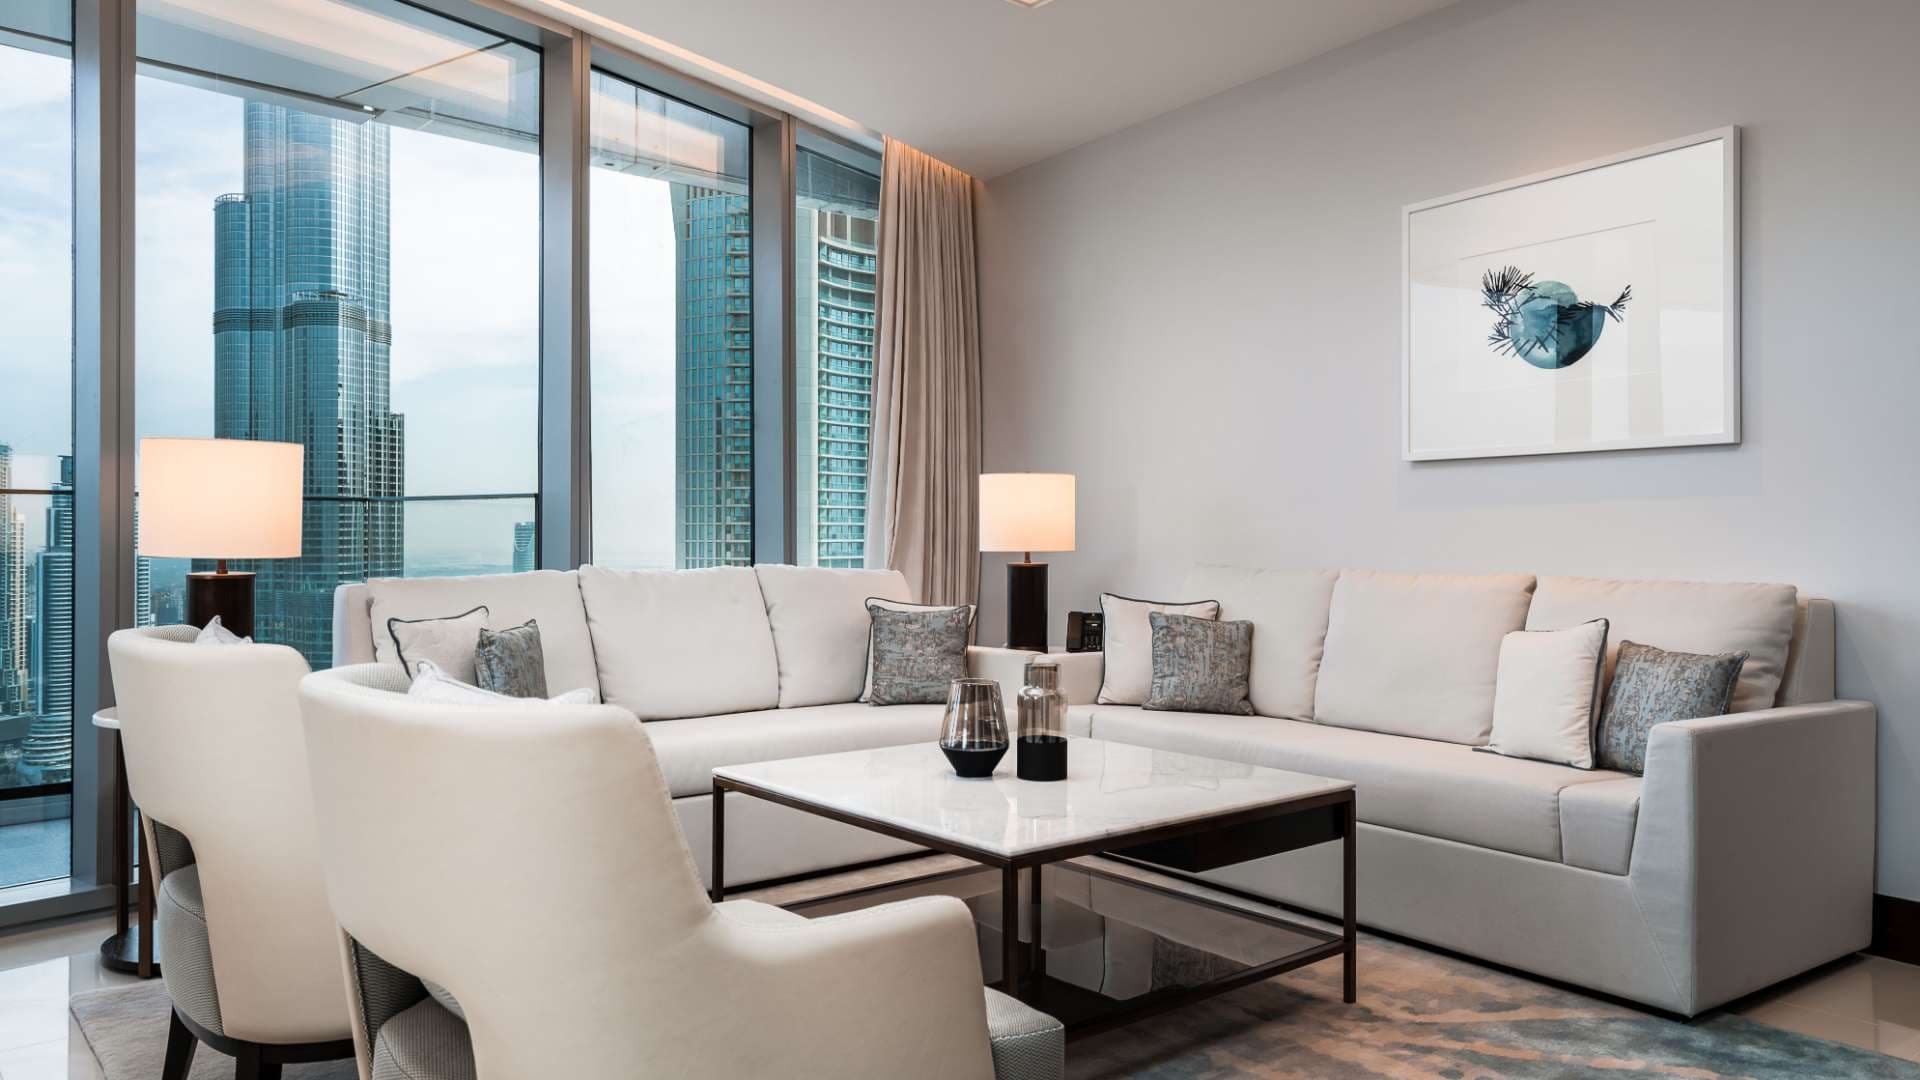 3 Bedroom Apartment For Sale Address Residences Sky View Lp09126 7c9731d3bf3f280.jpg